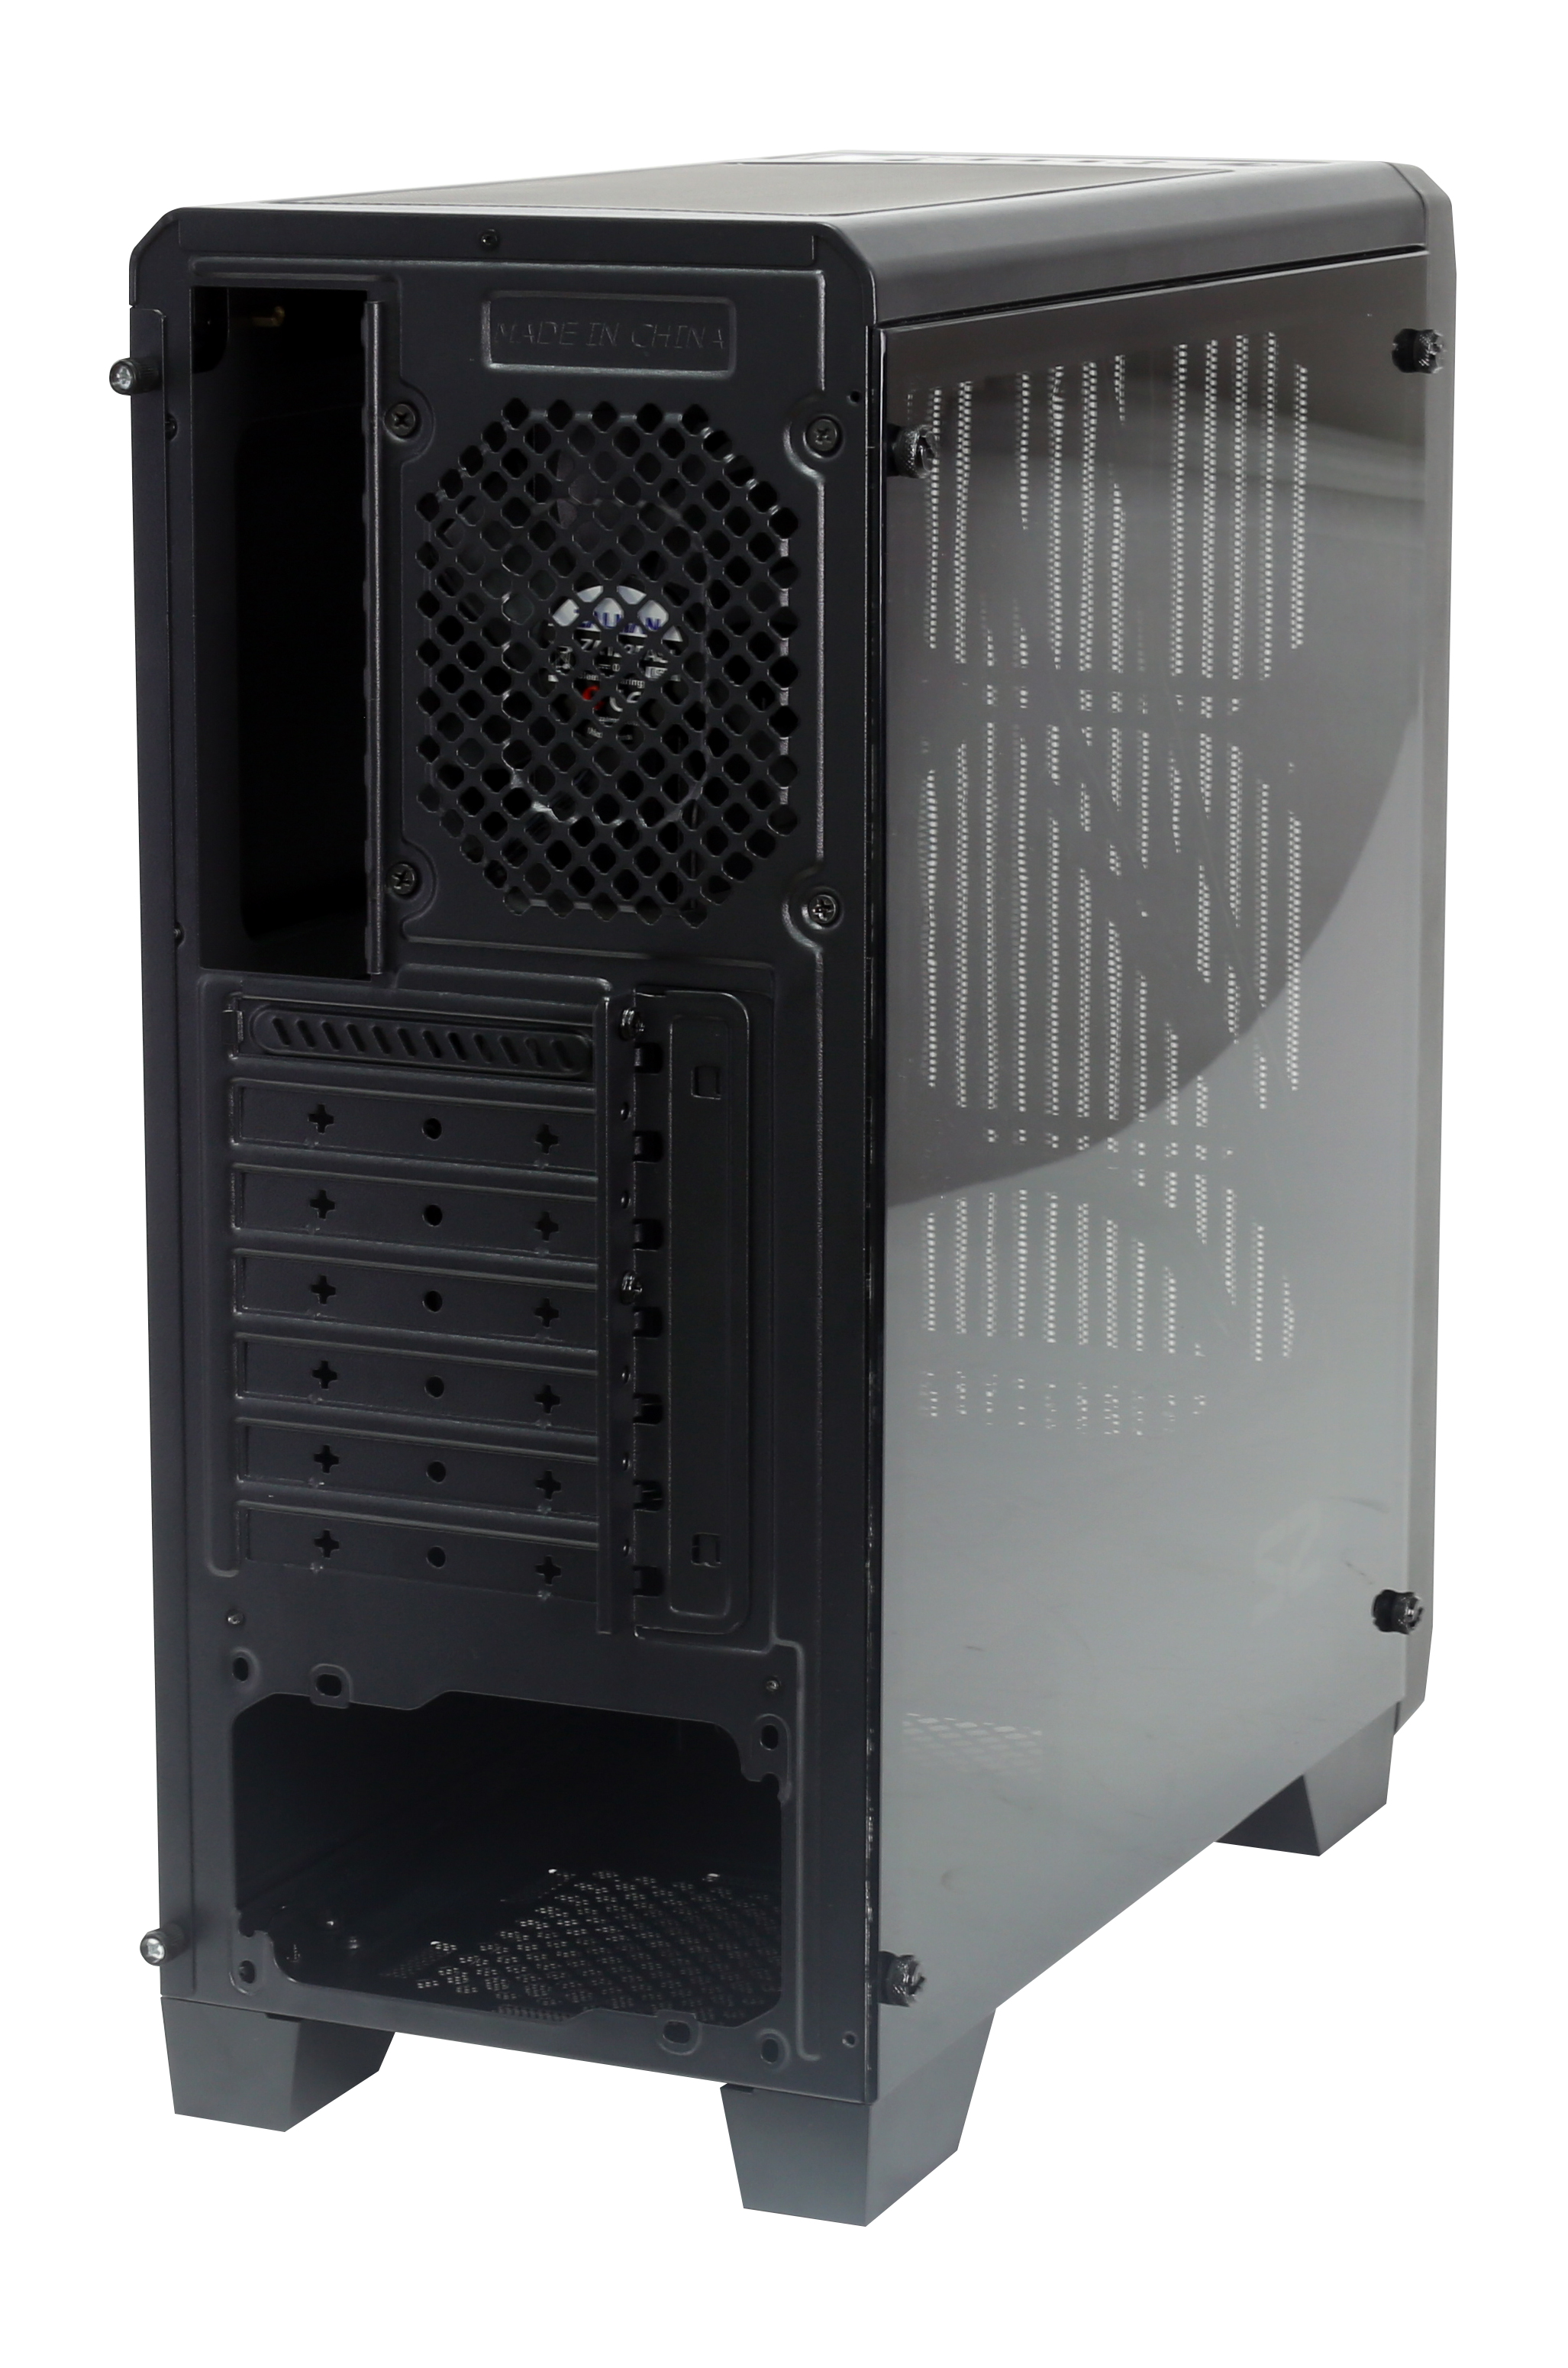 Zalman S2, ATX Mid Tower PC Case / - Pre-installed fan : 120mm black fan in rear / - Air vent on front for efficient cooling / - Acrylic window on left / - Dust filter at bottom & top / - Dimension : 412(D) x 189(W) x 451(H)mm